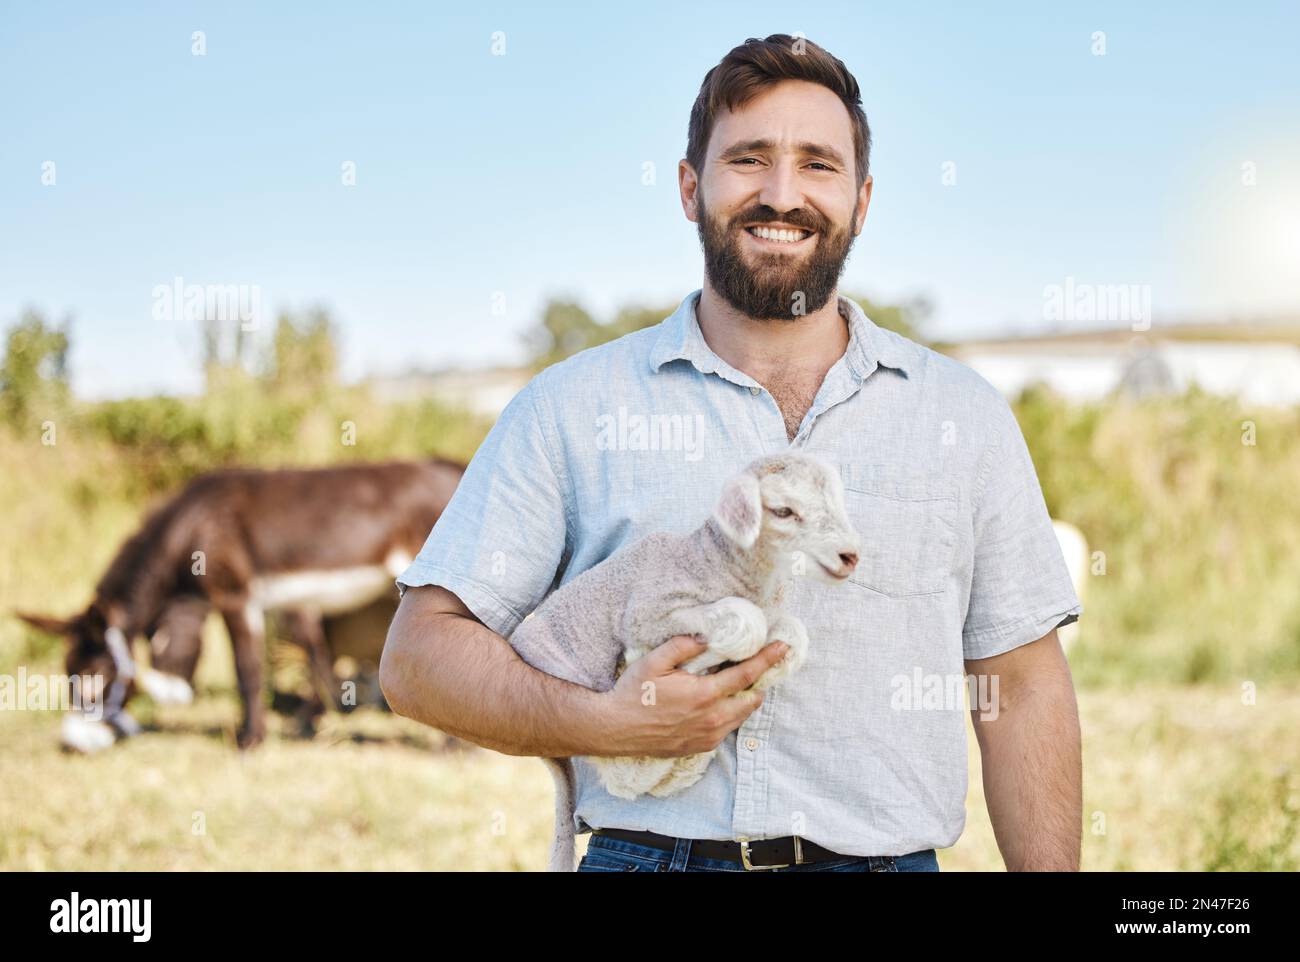 Farmer, portrait or baby lamb on livestock agriculture, countryside environment or nature in sheep growth management. Happy, farming or man and mutton Stock Photo